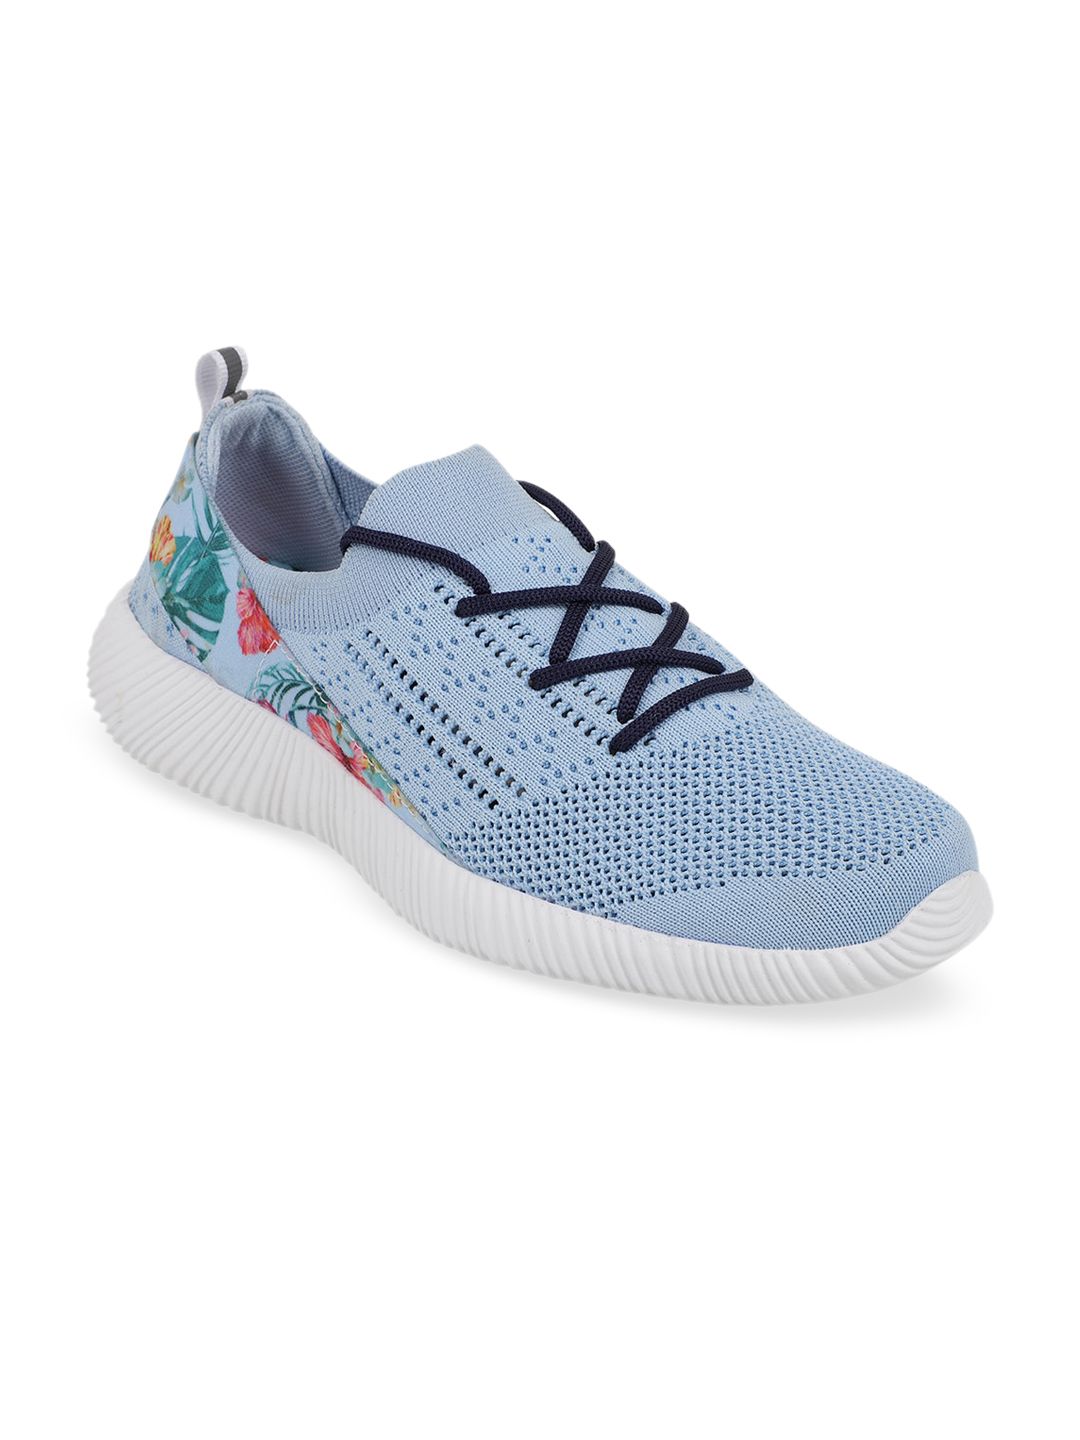 KazarMax Women Blue & Pink Floral Printed Mesh Training or Gym Shoes Price in India